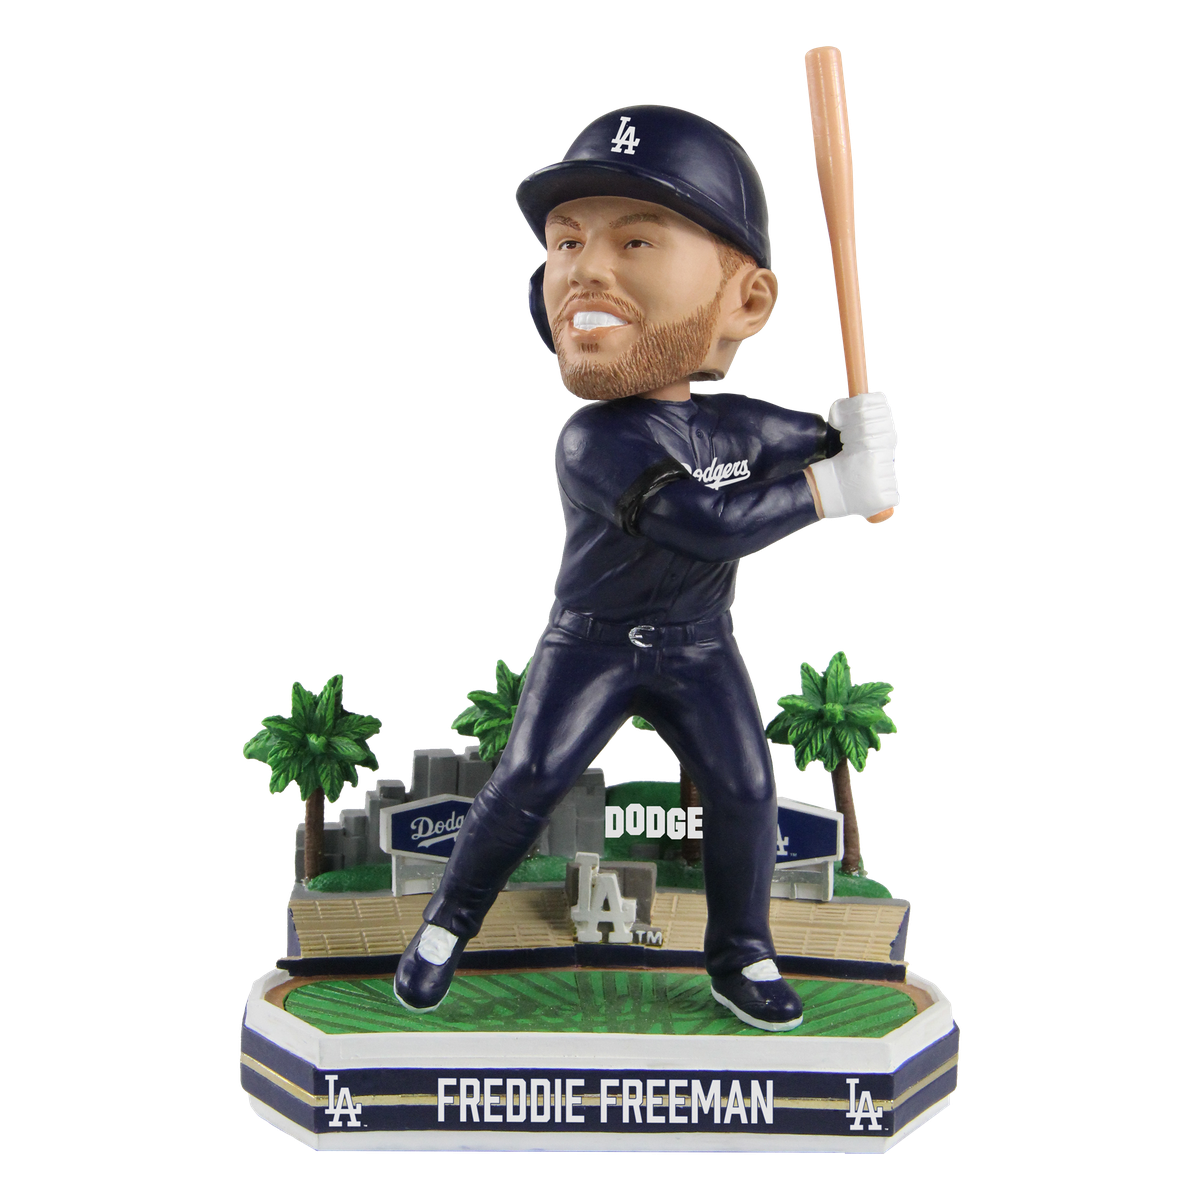 Freddie Freeman Dodgers city connect bobblehead for 2022.